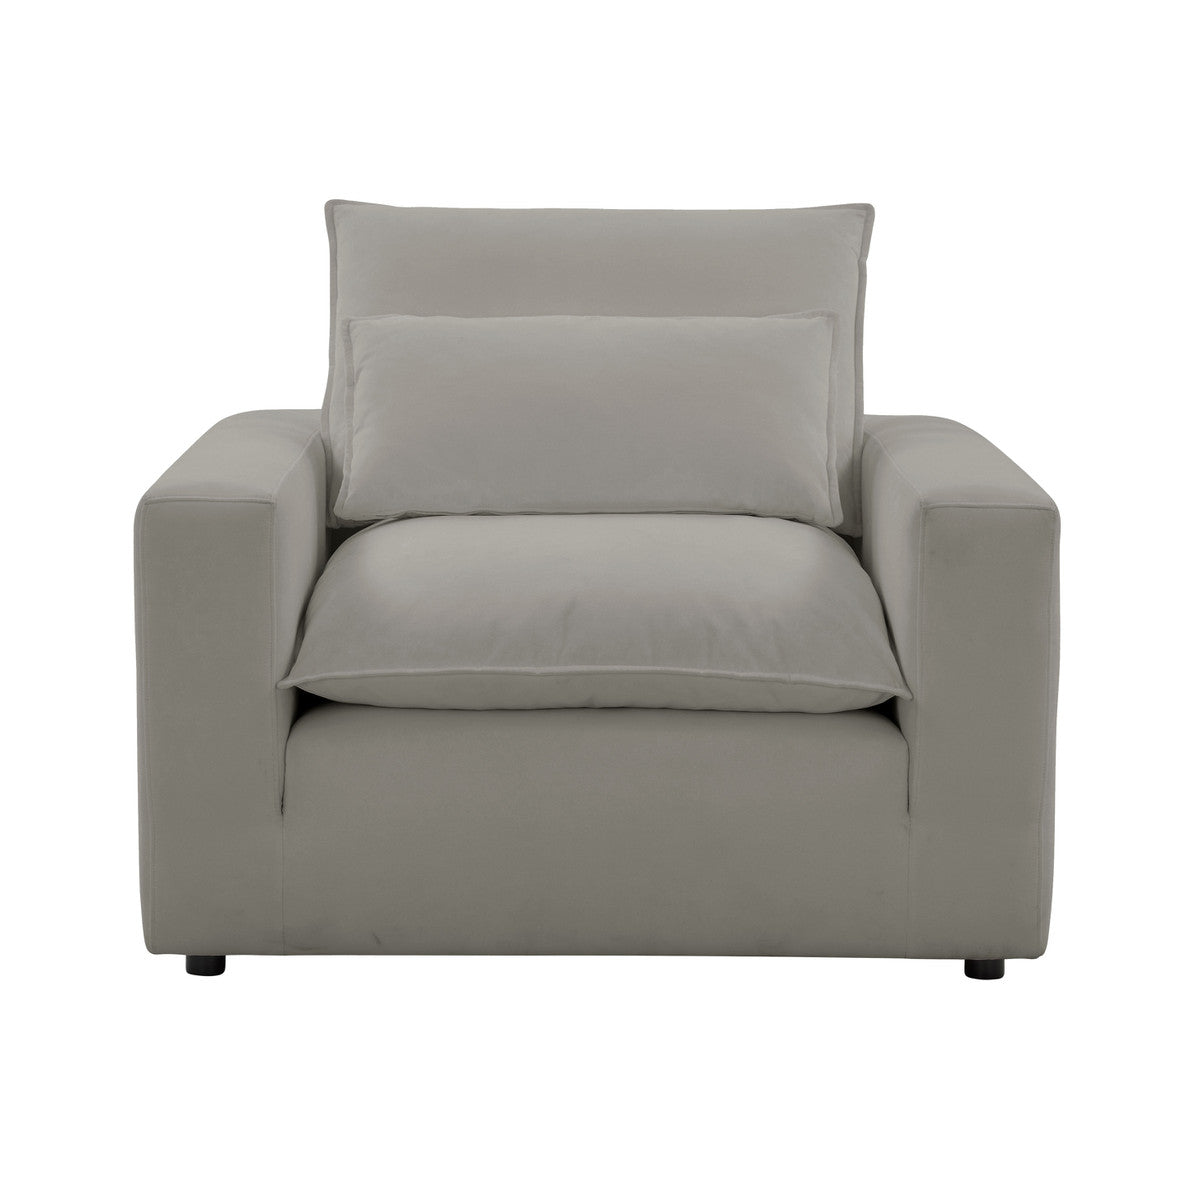 Carlie Slate Arm Chair - Luxury Living Collection